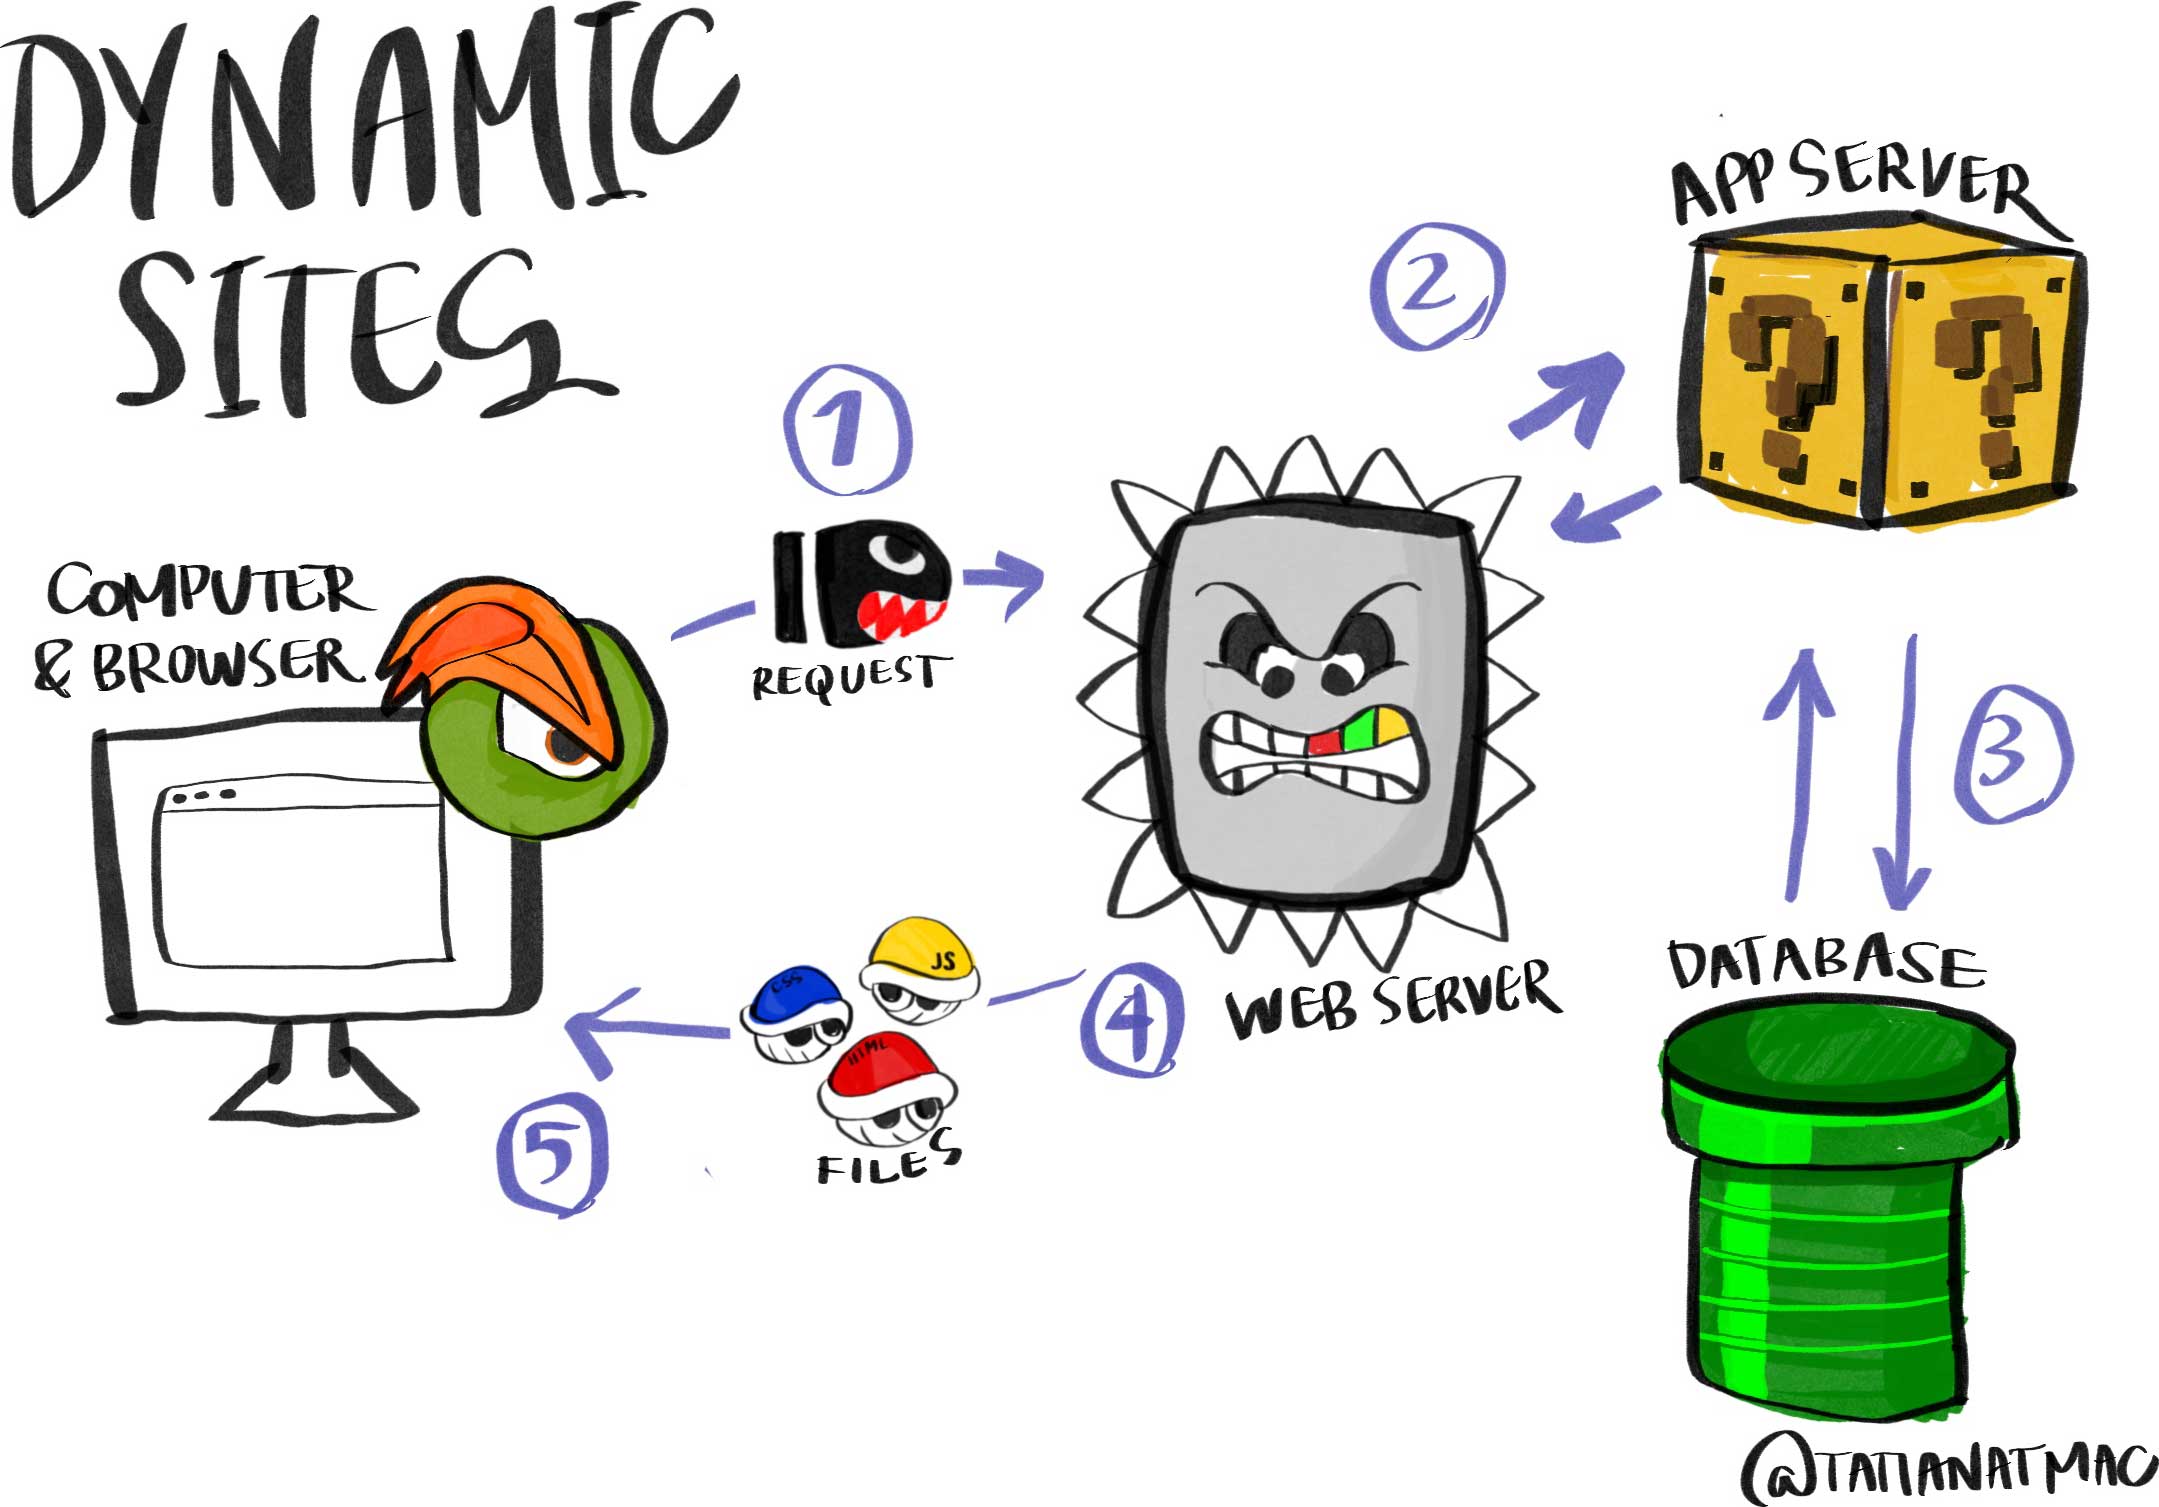 Diagram of static sites where all elements are from Super Mario to illustrate how static sites are generated. Computer and browser (browser logo is Bowser's eye and eyebrow done in Firefox/Edge style) sends a request (Bullet Bill) to the web server (Thomp), which communicates with app server (question mark block), which then communicates with database (pipe) then sends back static files (Koopas dresed as HTML, CSS, and JS files).